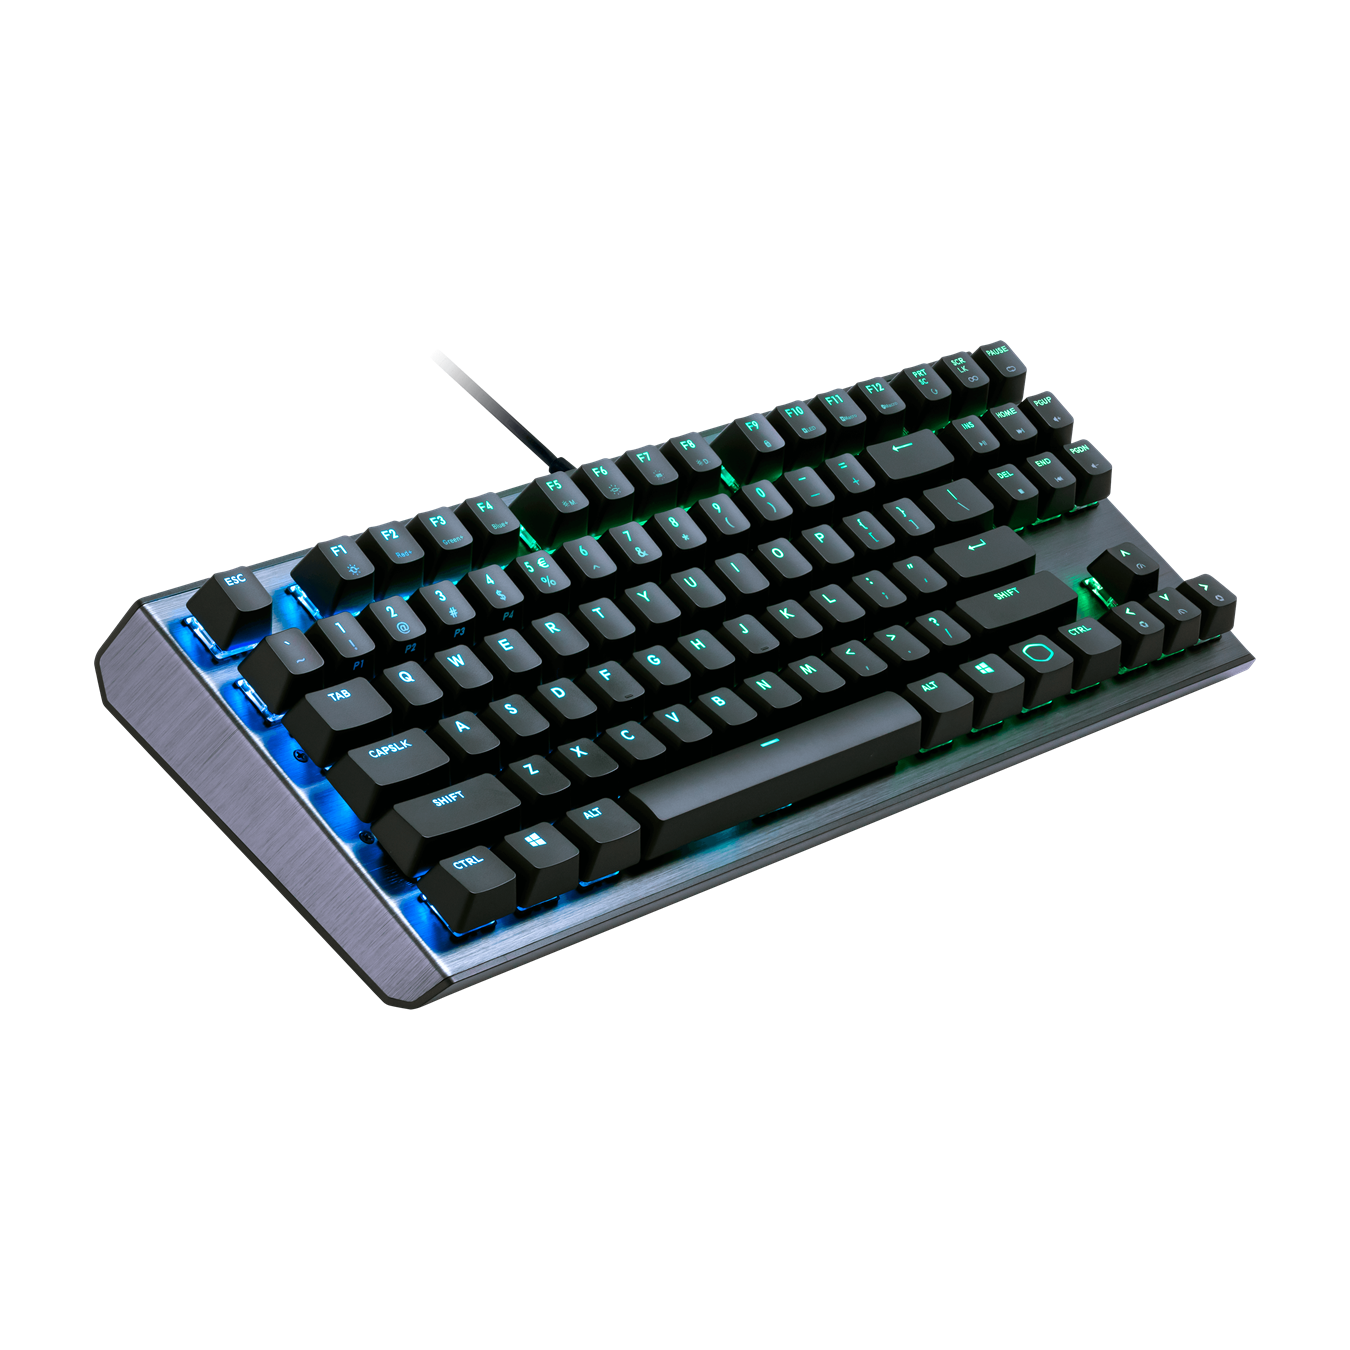 CK530 Mechanical Gaming Keyboard - Curved top plate, floating keycaps, and minimalistic design built with functionality in mind